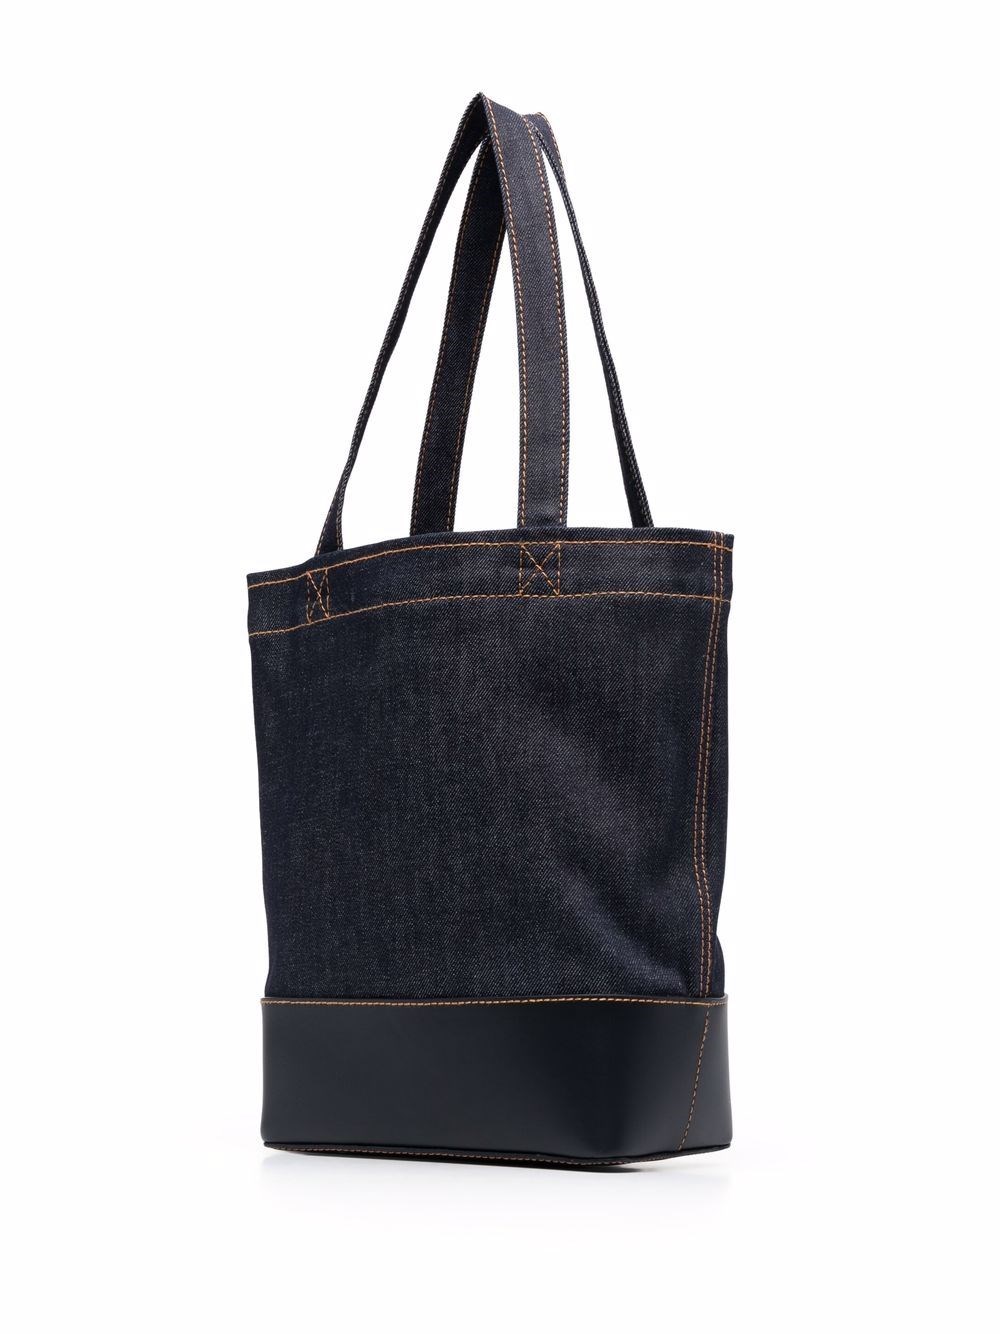 a.p.c. SMALL AXEL TOTE available on montiboutique.com - 52617